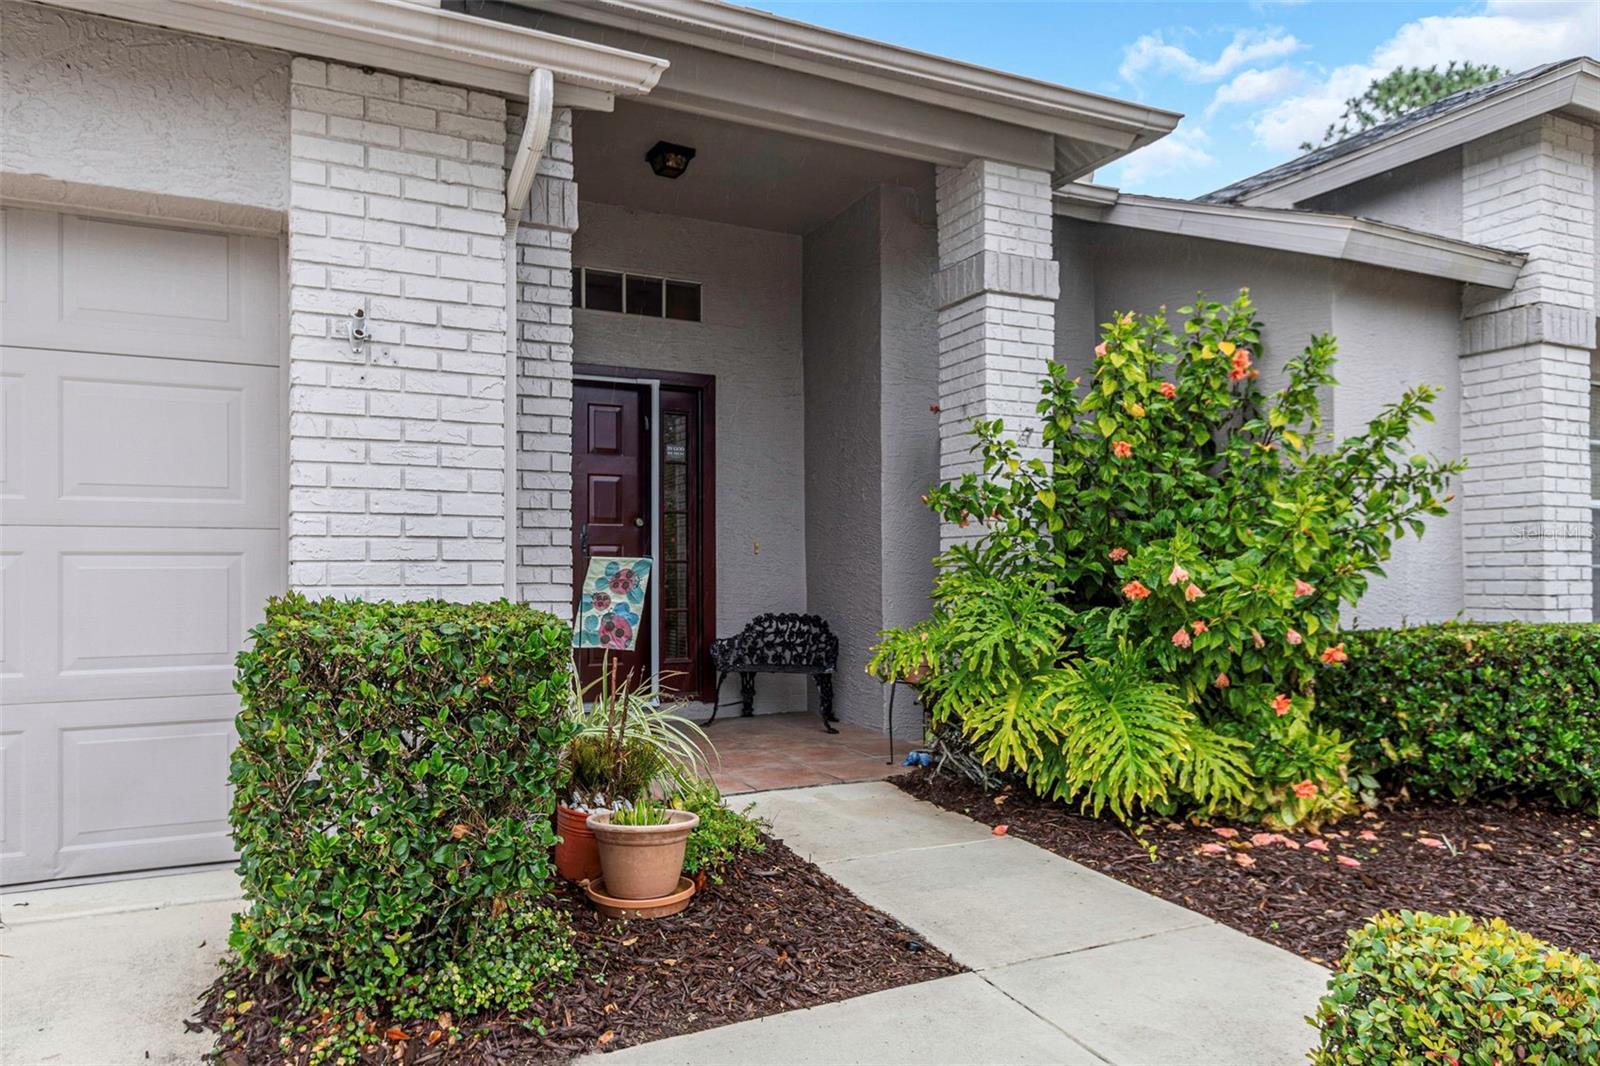 Photo one of 3160 Whispering Pines Ct Spring Hill FL 34606 | MLS U8231565